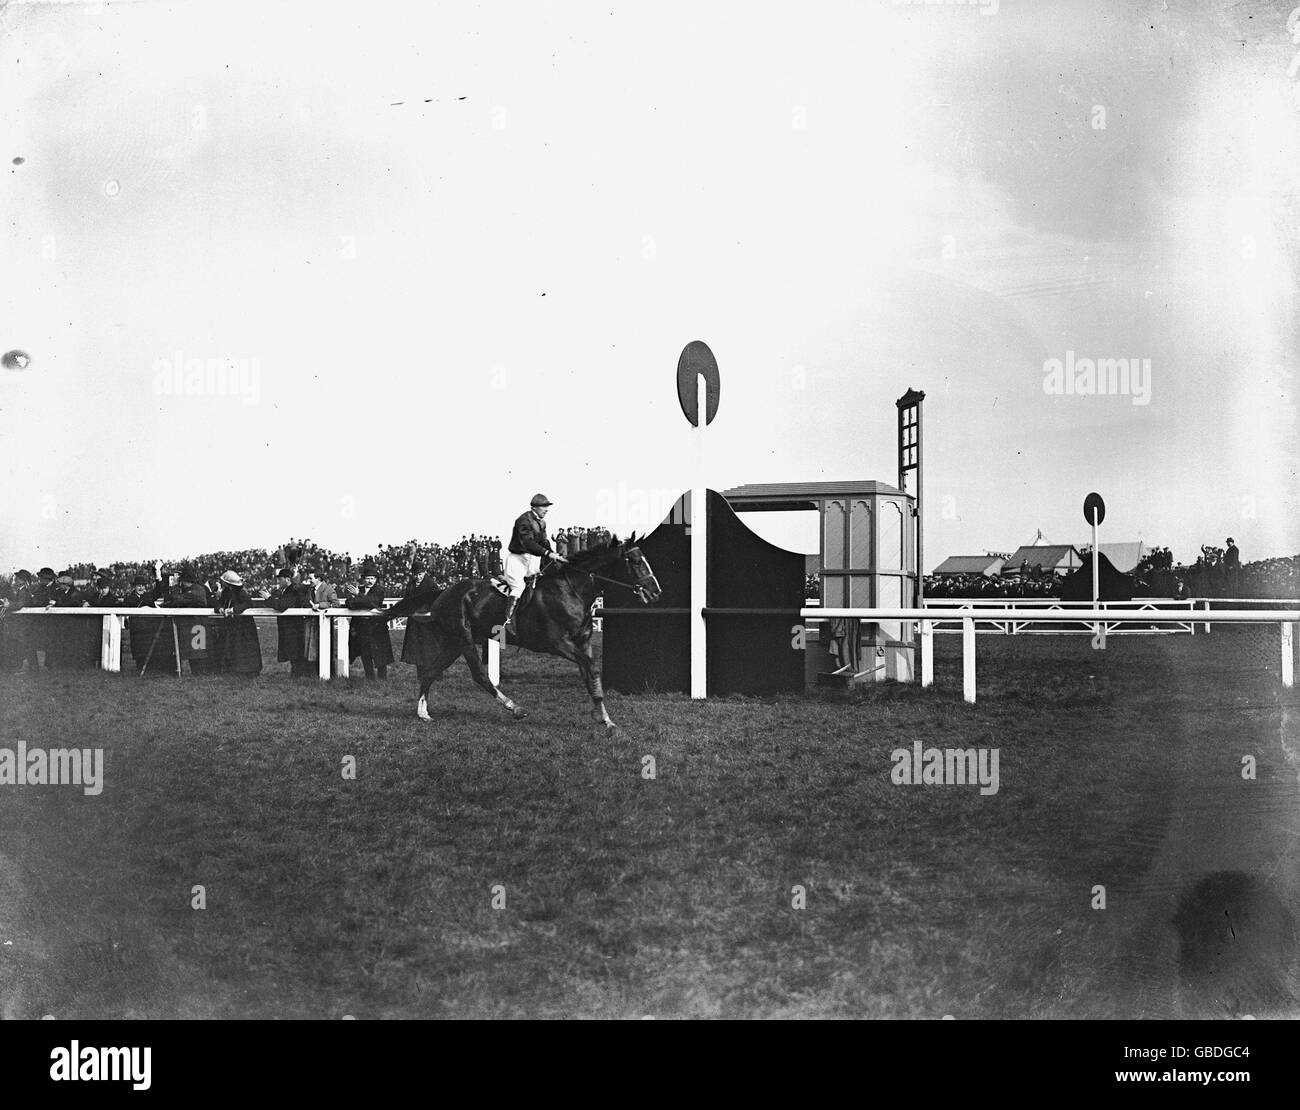 Sunloch ridden by Bill Smith the winner of The Grand National in 1914. Stock Photo